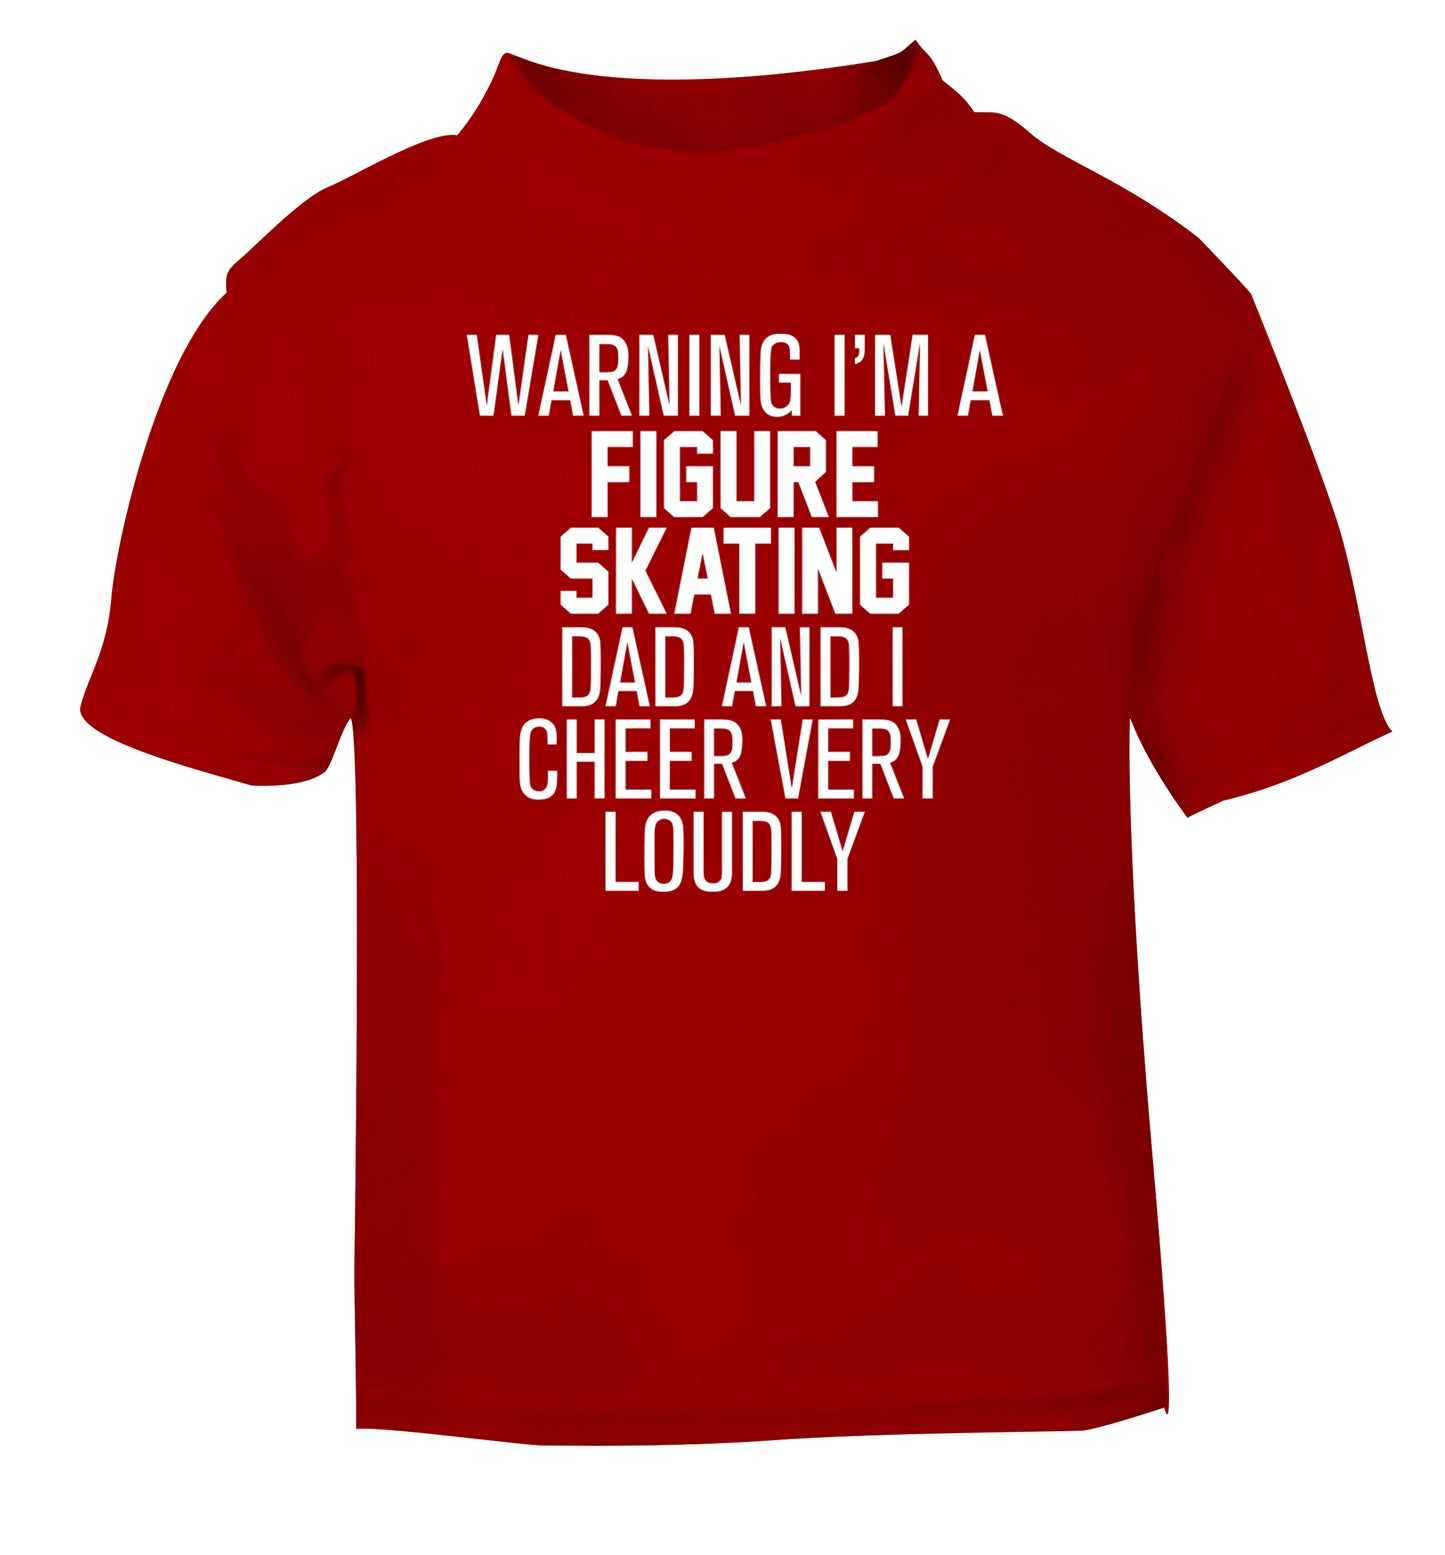 Warning I'm a figure skating dad and I cheer very loudly red Baby Toddler Tshirt 2 Years